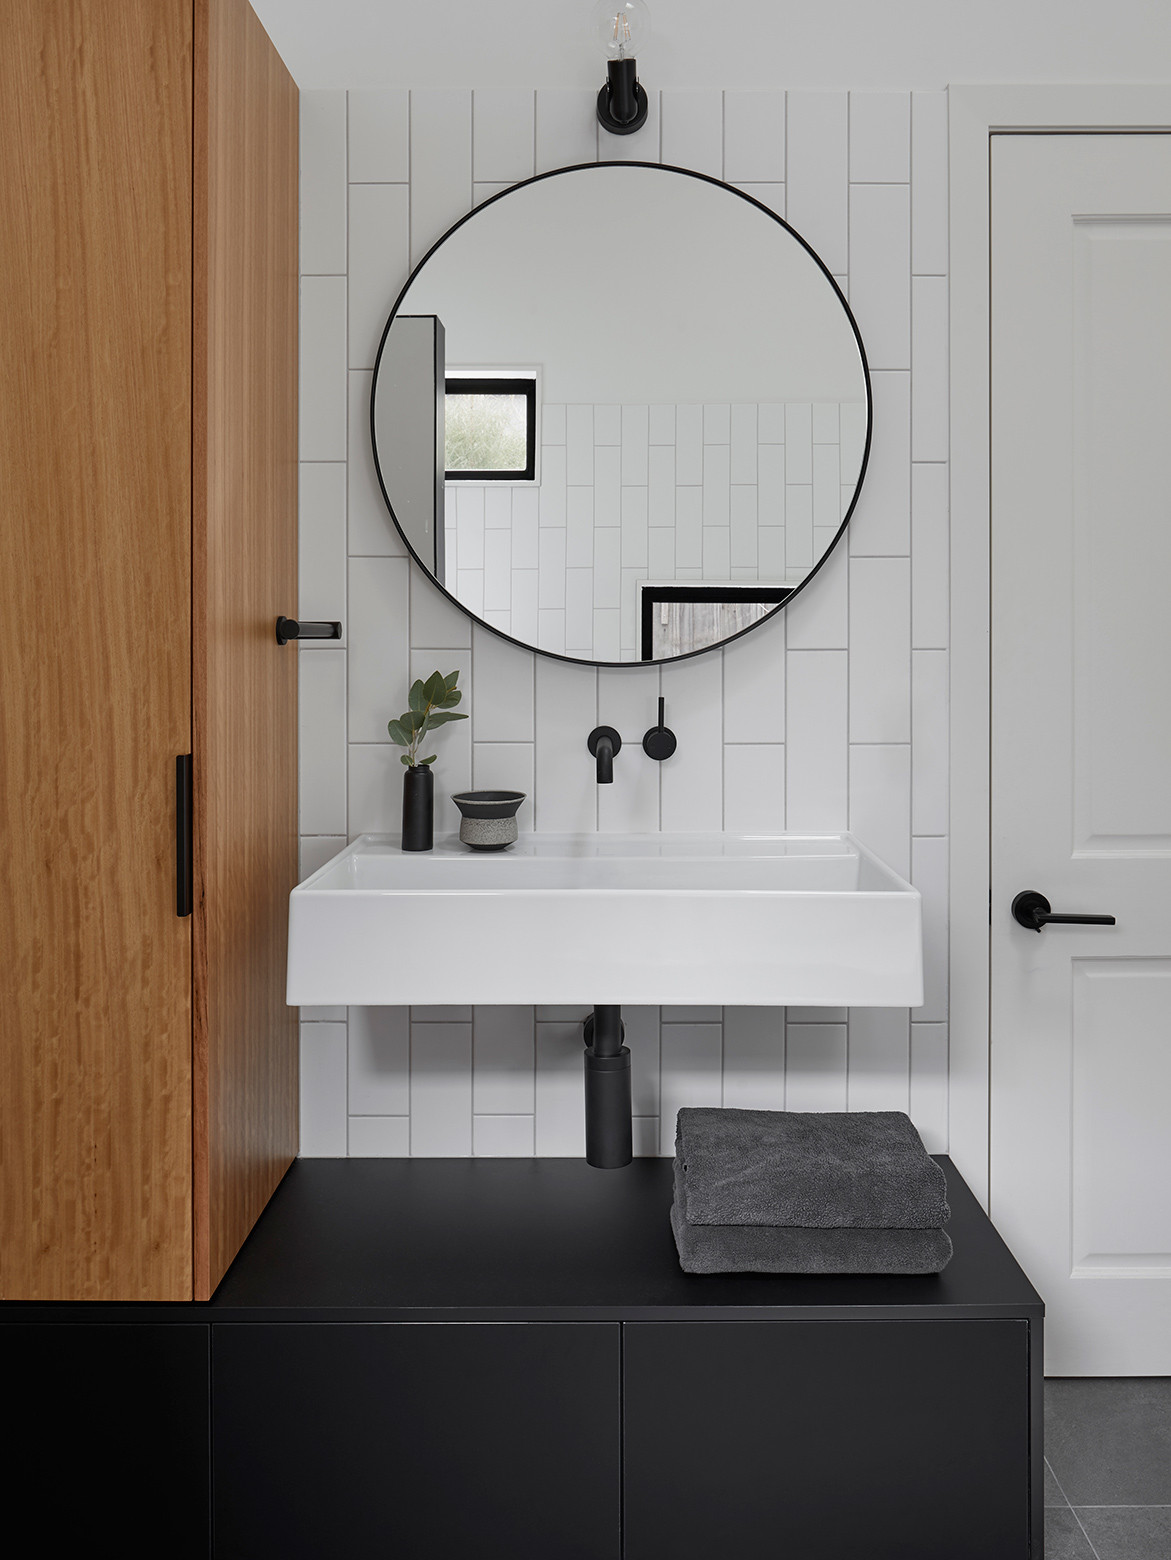 How Architecture Can Improve Connections | bathroom